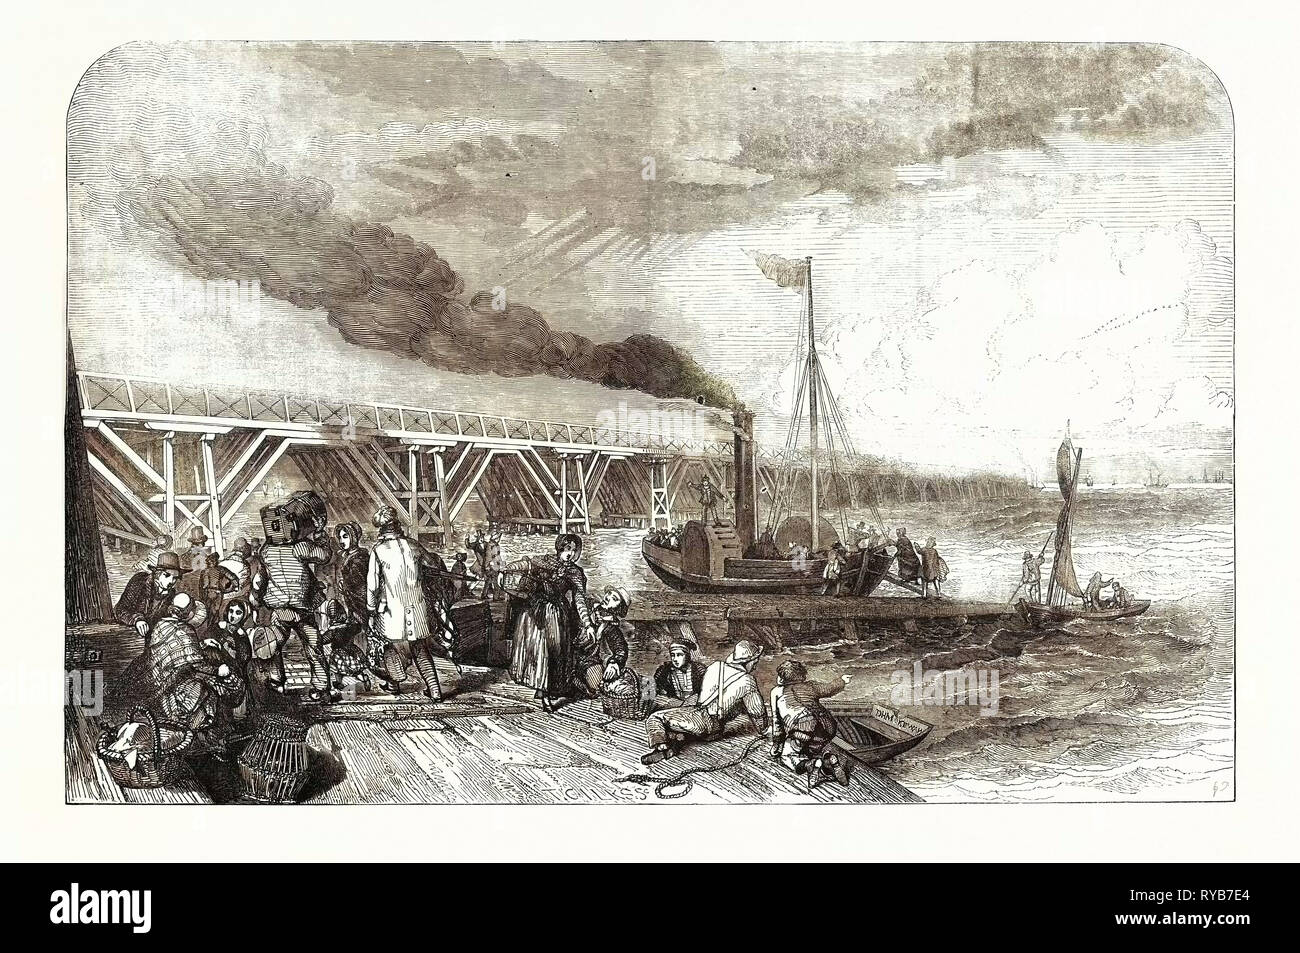 The New Holland Ferry on the Humber, Belonging Tothe Manchester, Sheffield, and Lincolnshire Railway, UK, 1848 Stock Photo